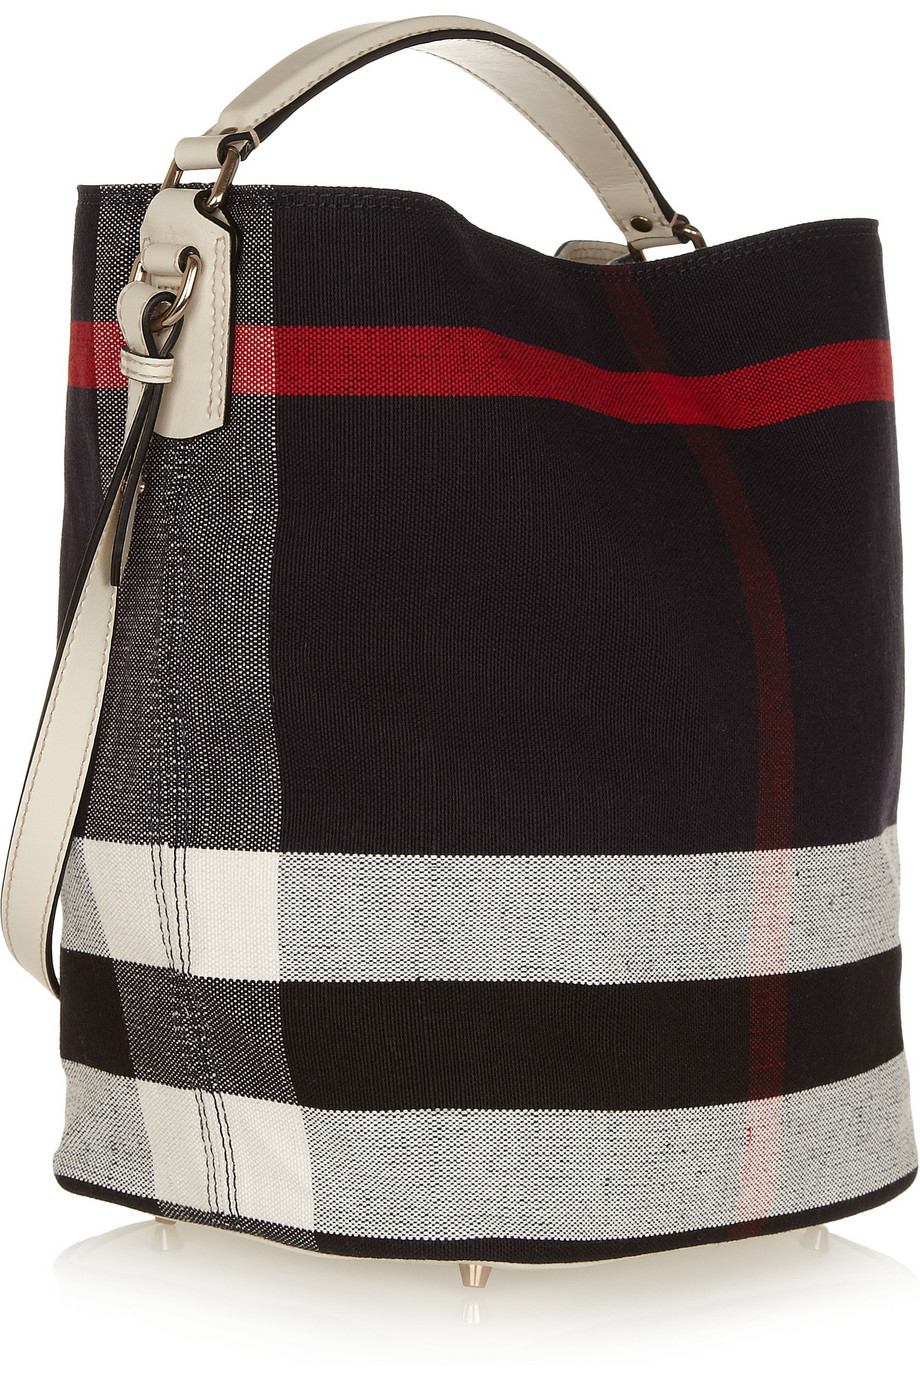 Burberry Checked Canvas Hobo Bag in Blue (Red) - Lyst